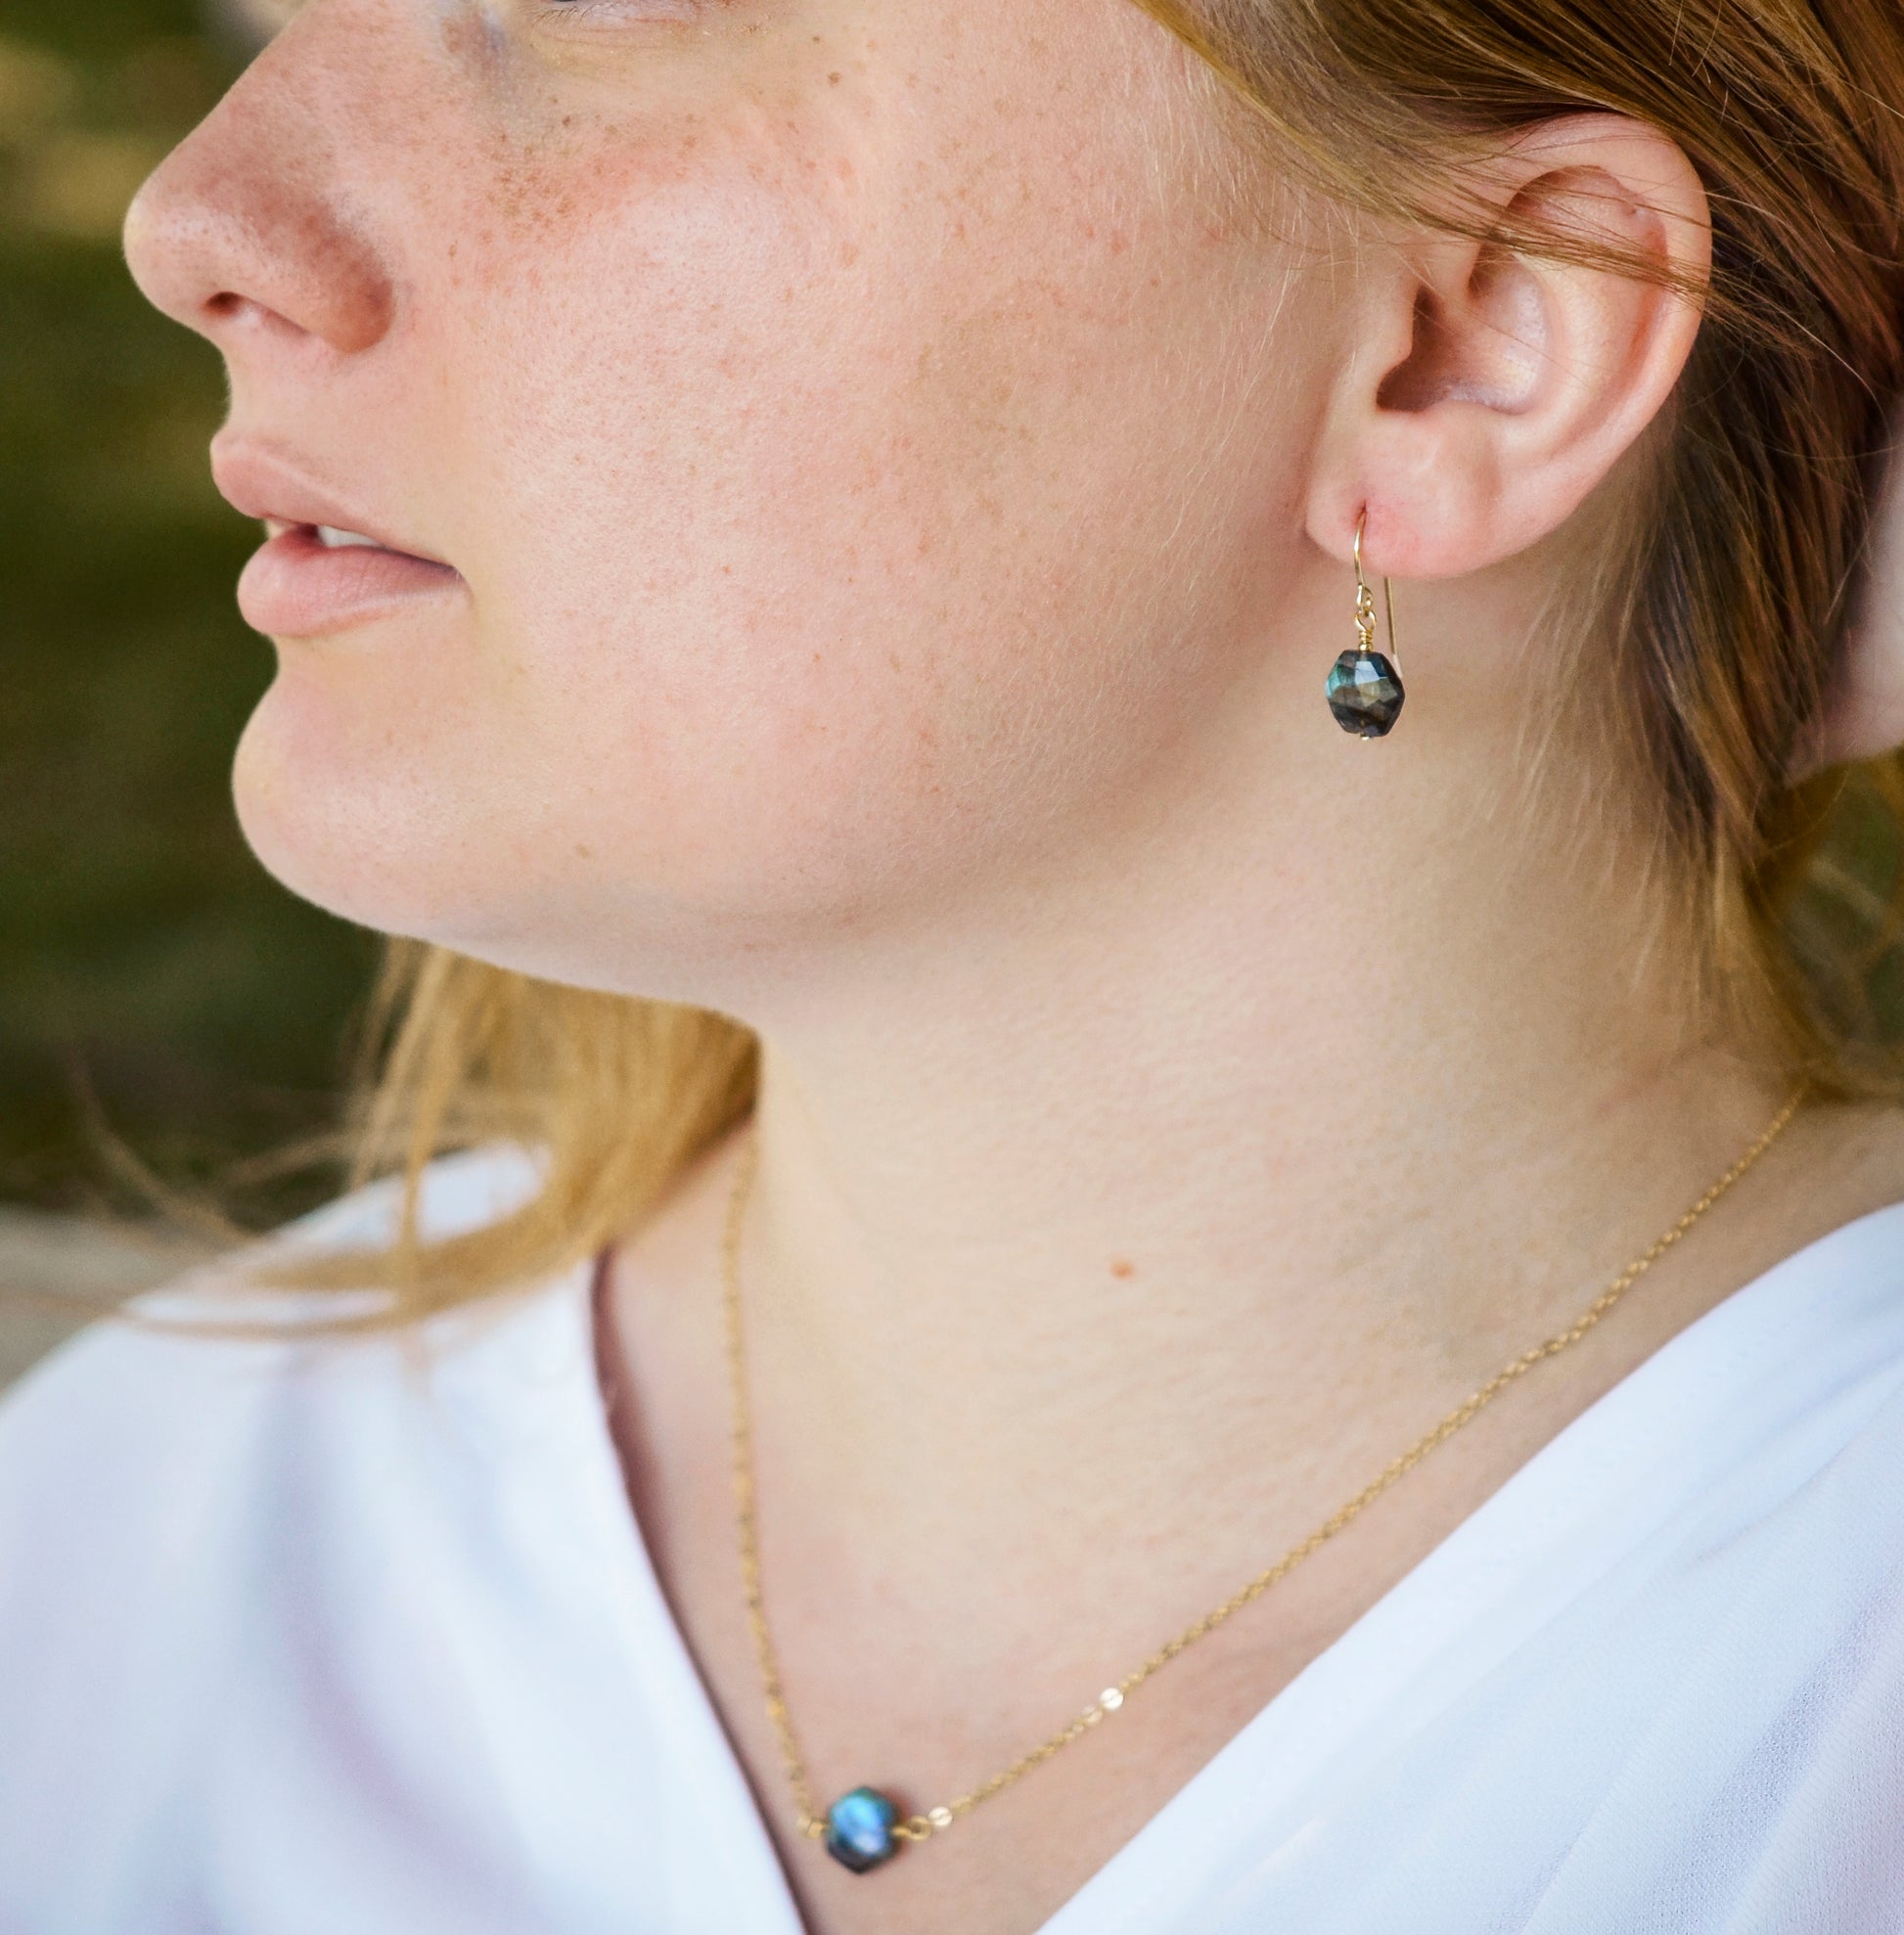 Blue flashing Labradorite gemstones in a faceted hexagonal shape dangle from 14k gold filled earring hooks. Small gold beads accent below the stone. Also available in sterling silver. Modeled image. Shown with matching necklace.